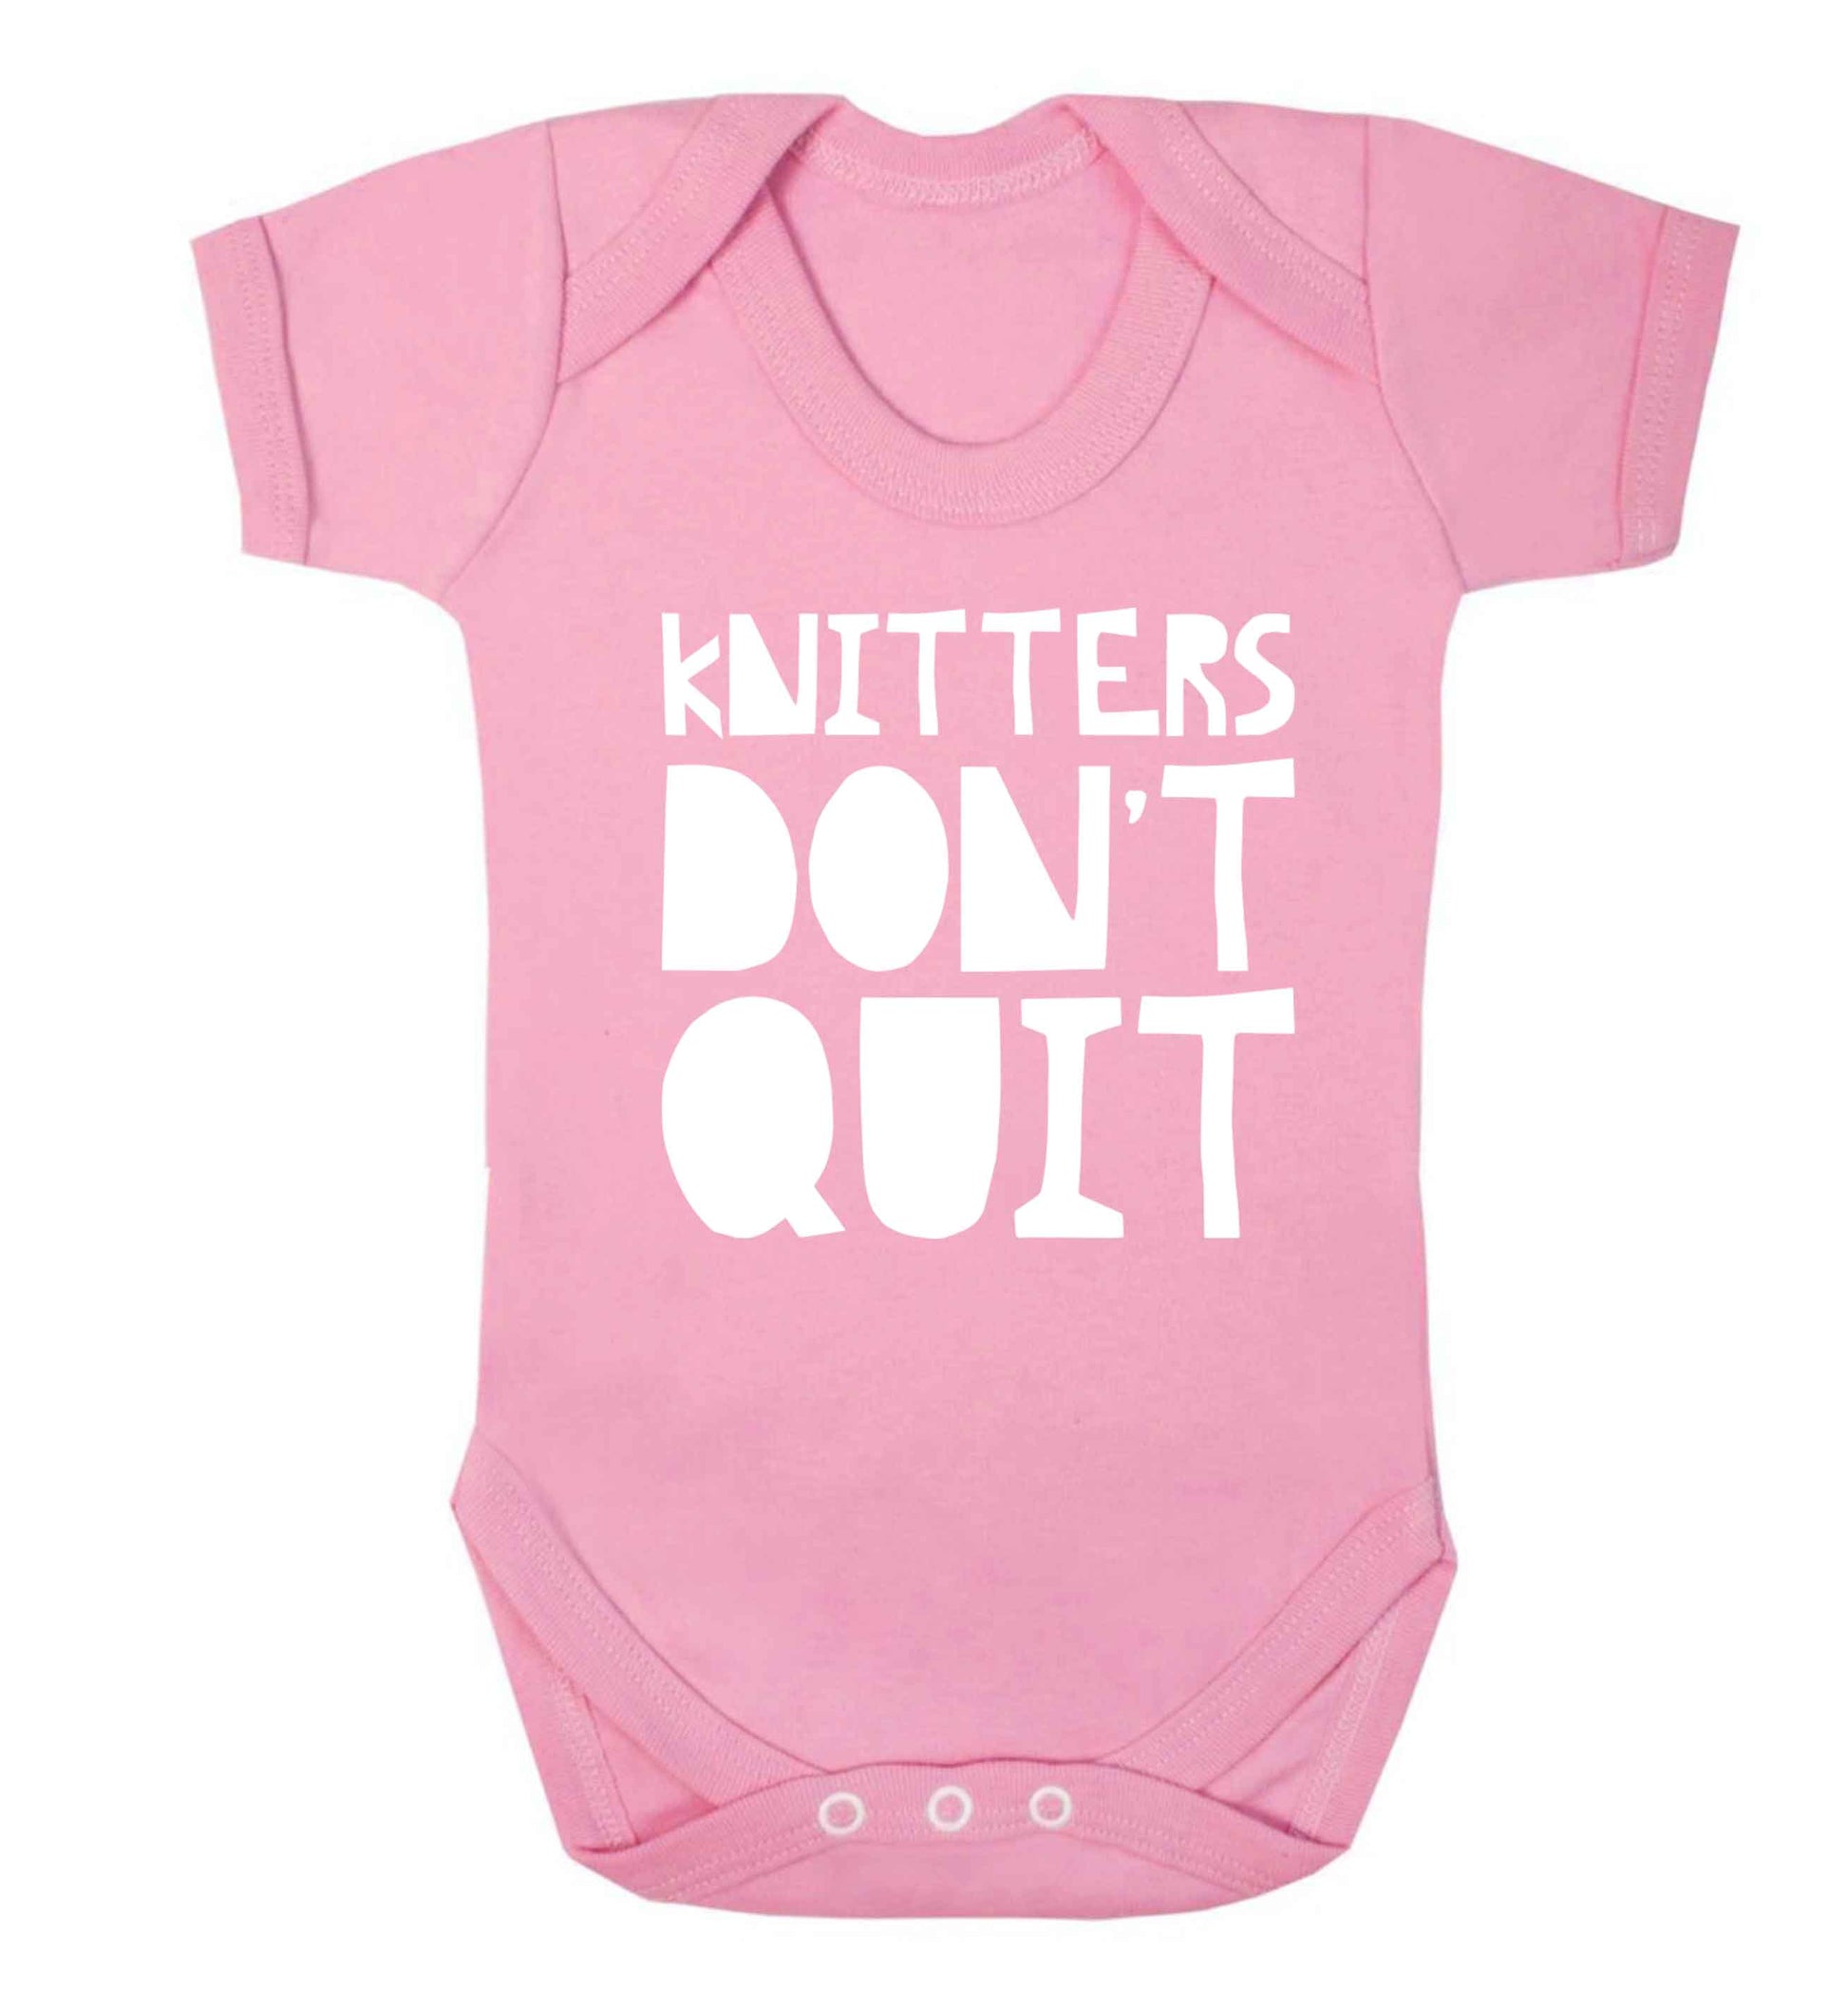 Knitters don't quit Baby Vest pale pink 18-24 months